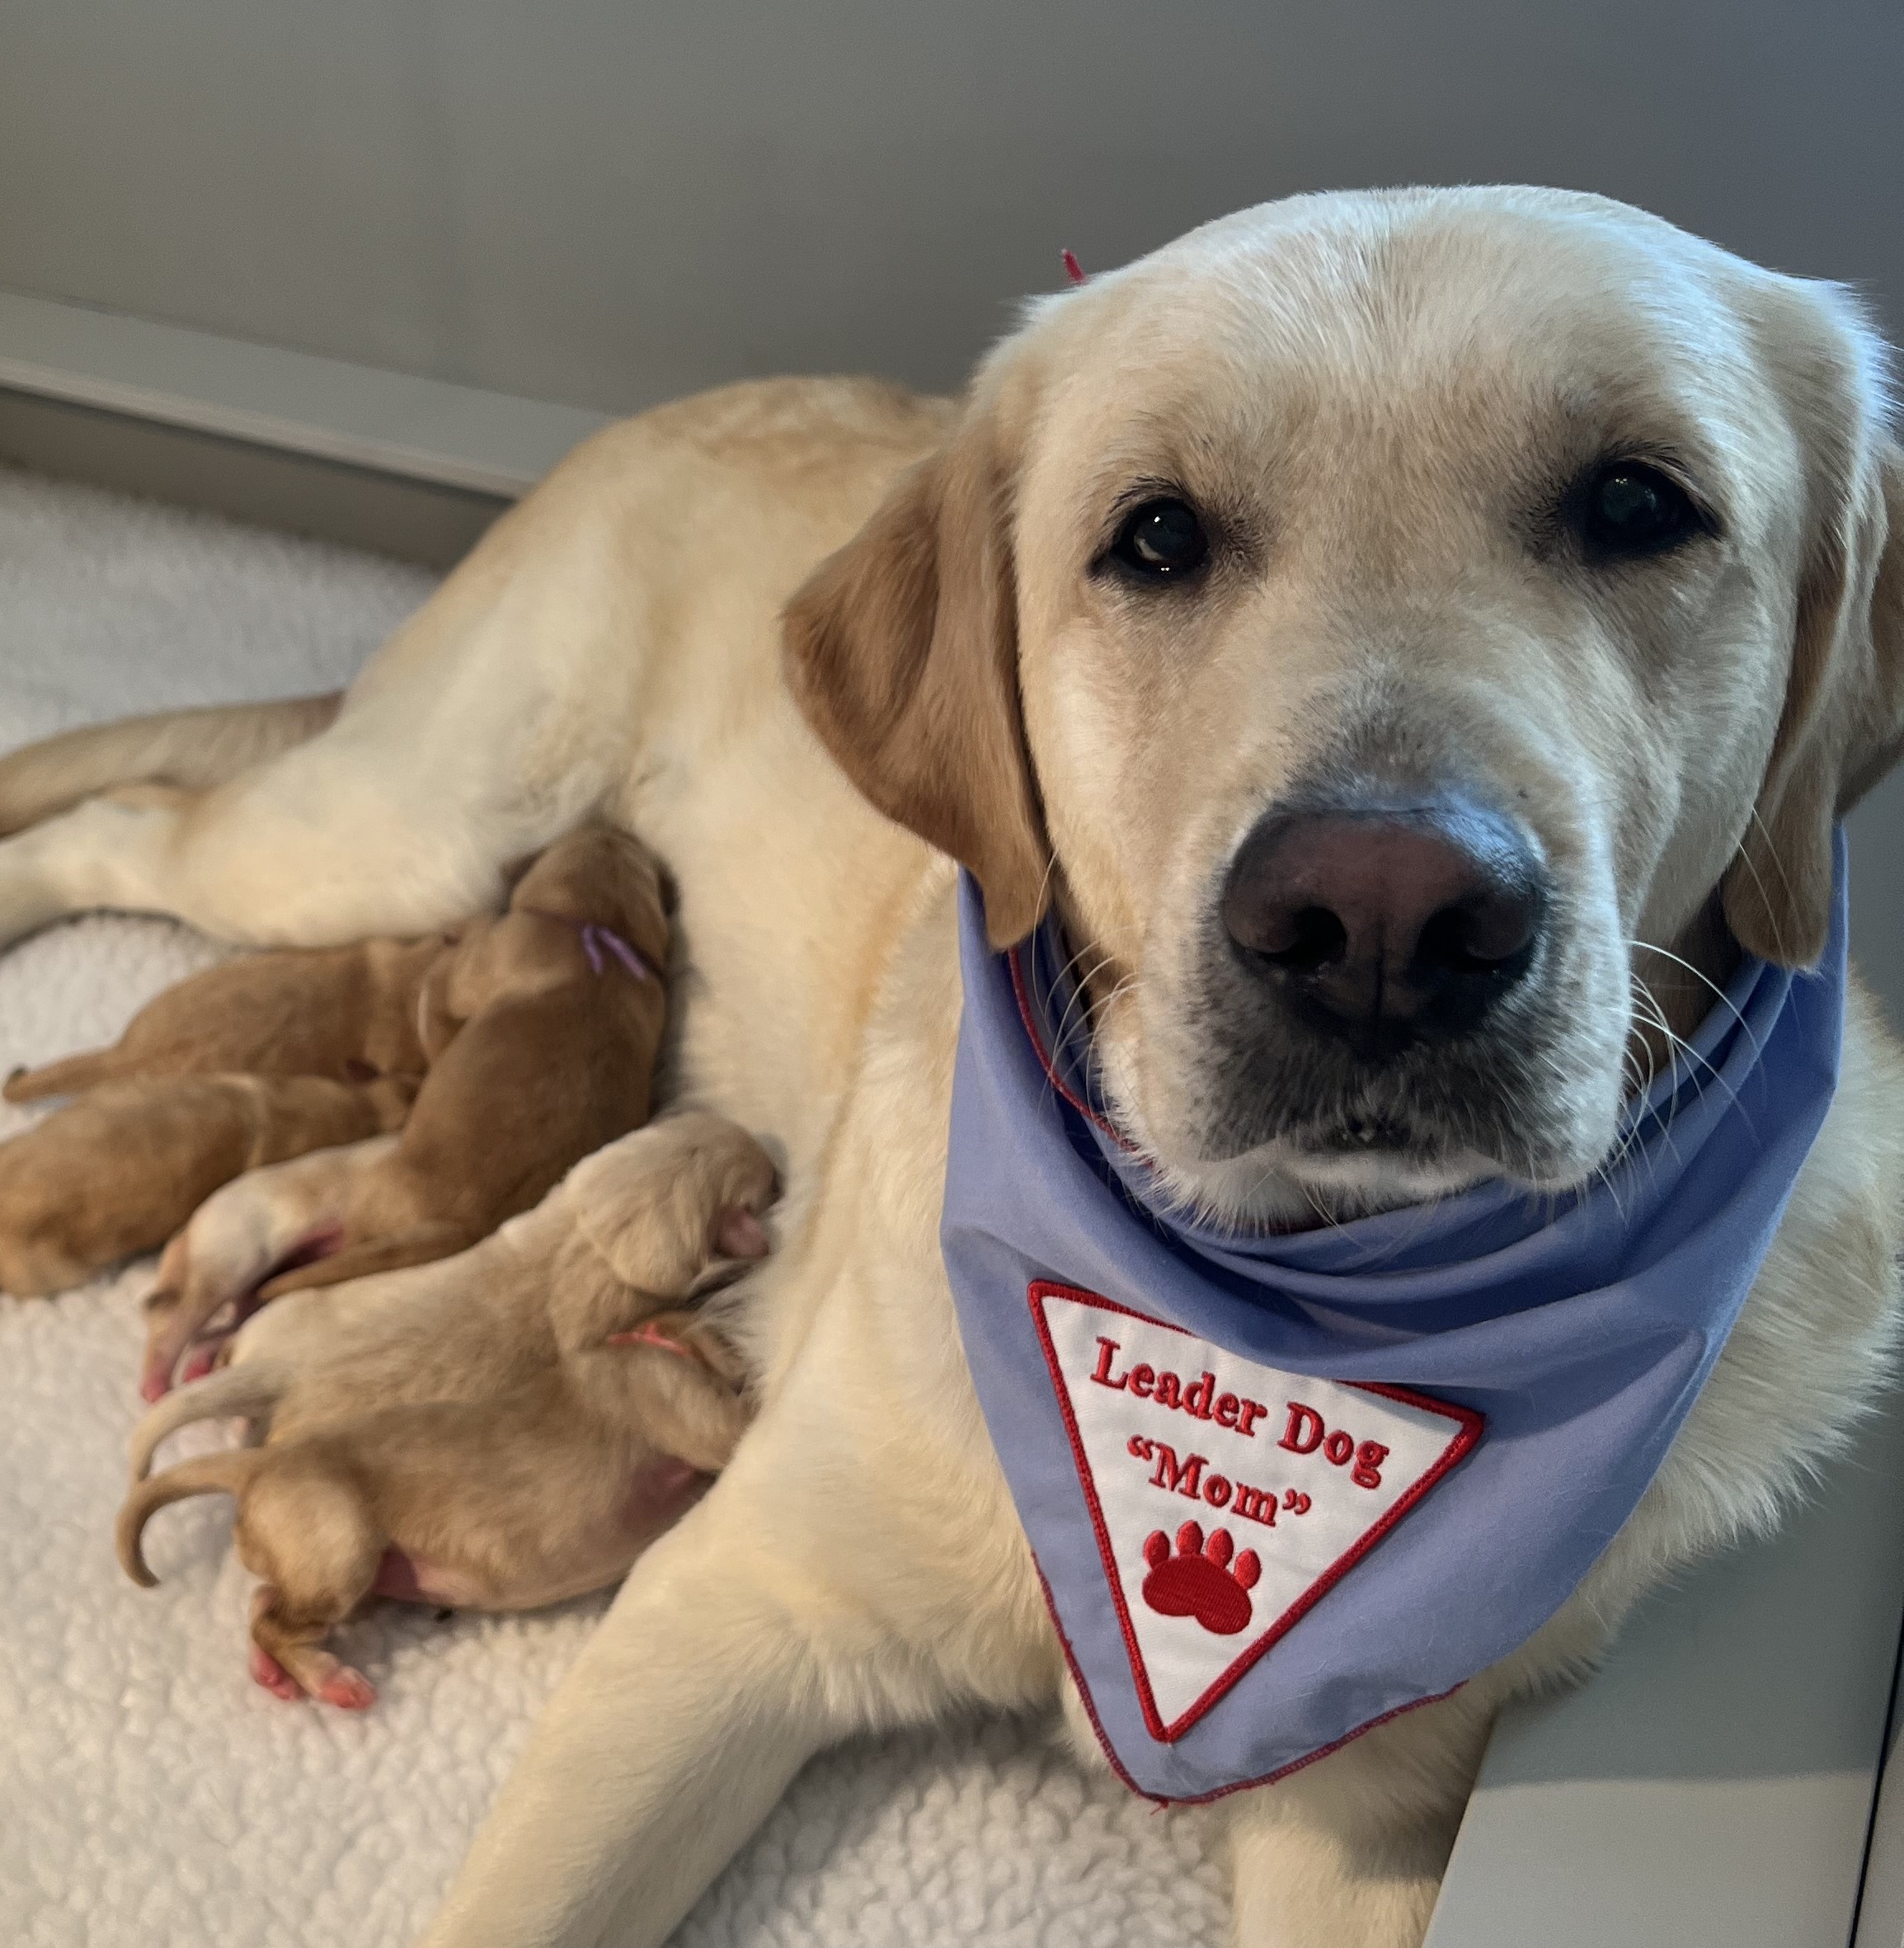 Leader Dog Mom with litter of puppies